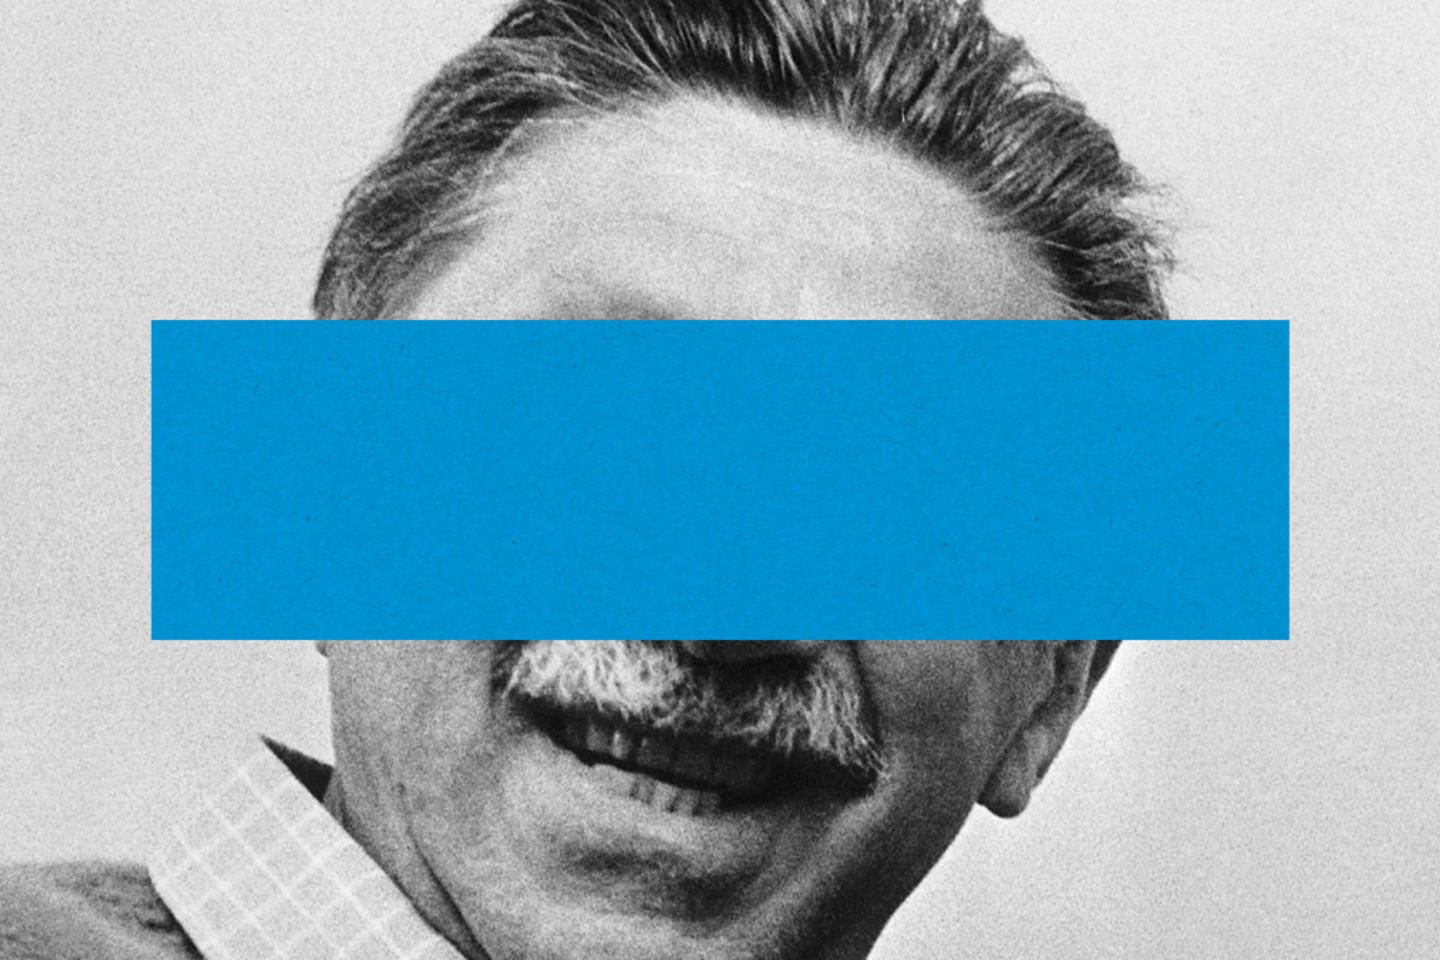 A photo of Abraham Maslow with a blue rectangle over his eyes